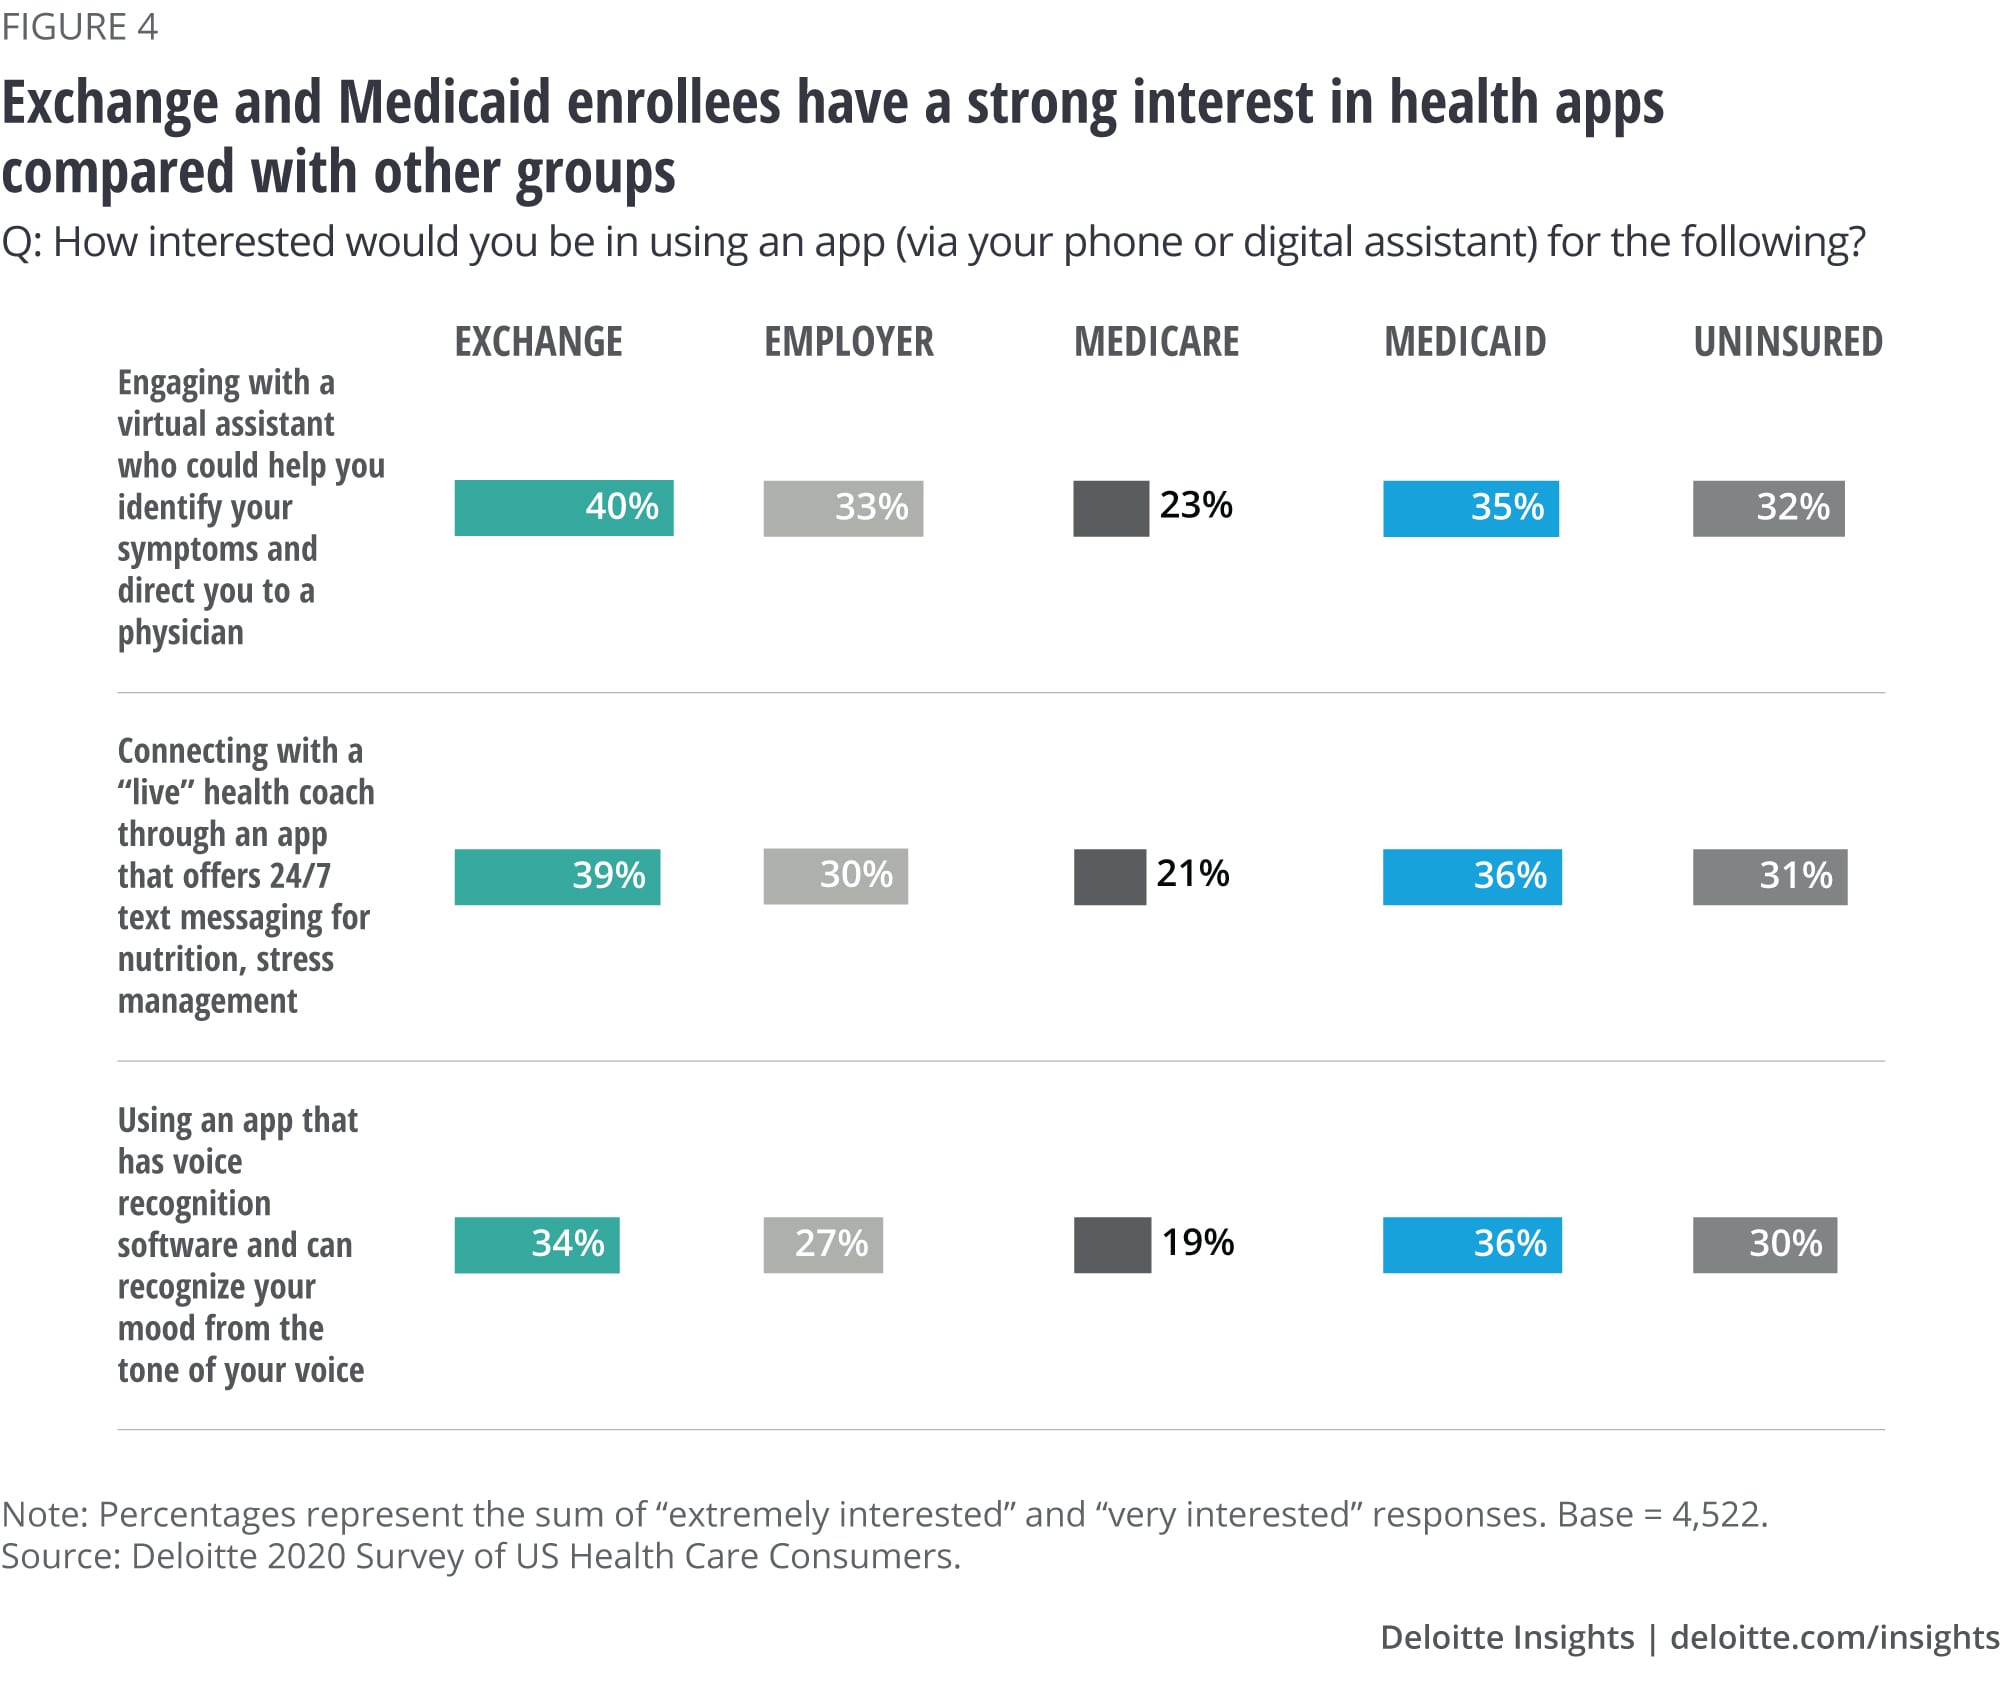 Exchange and Medicaid enrollees are groups with strong interest in health apps, compared with other groups